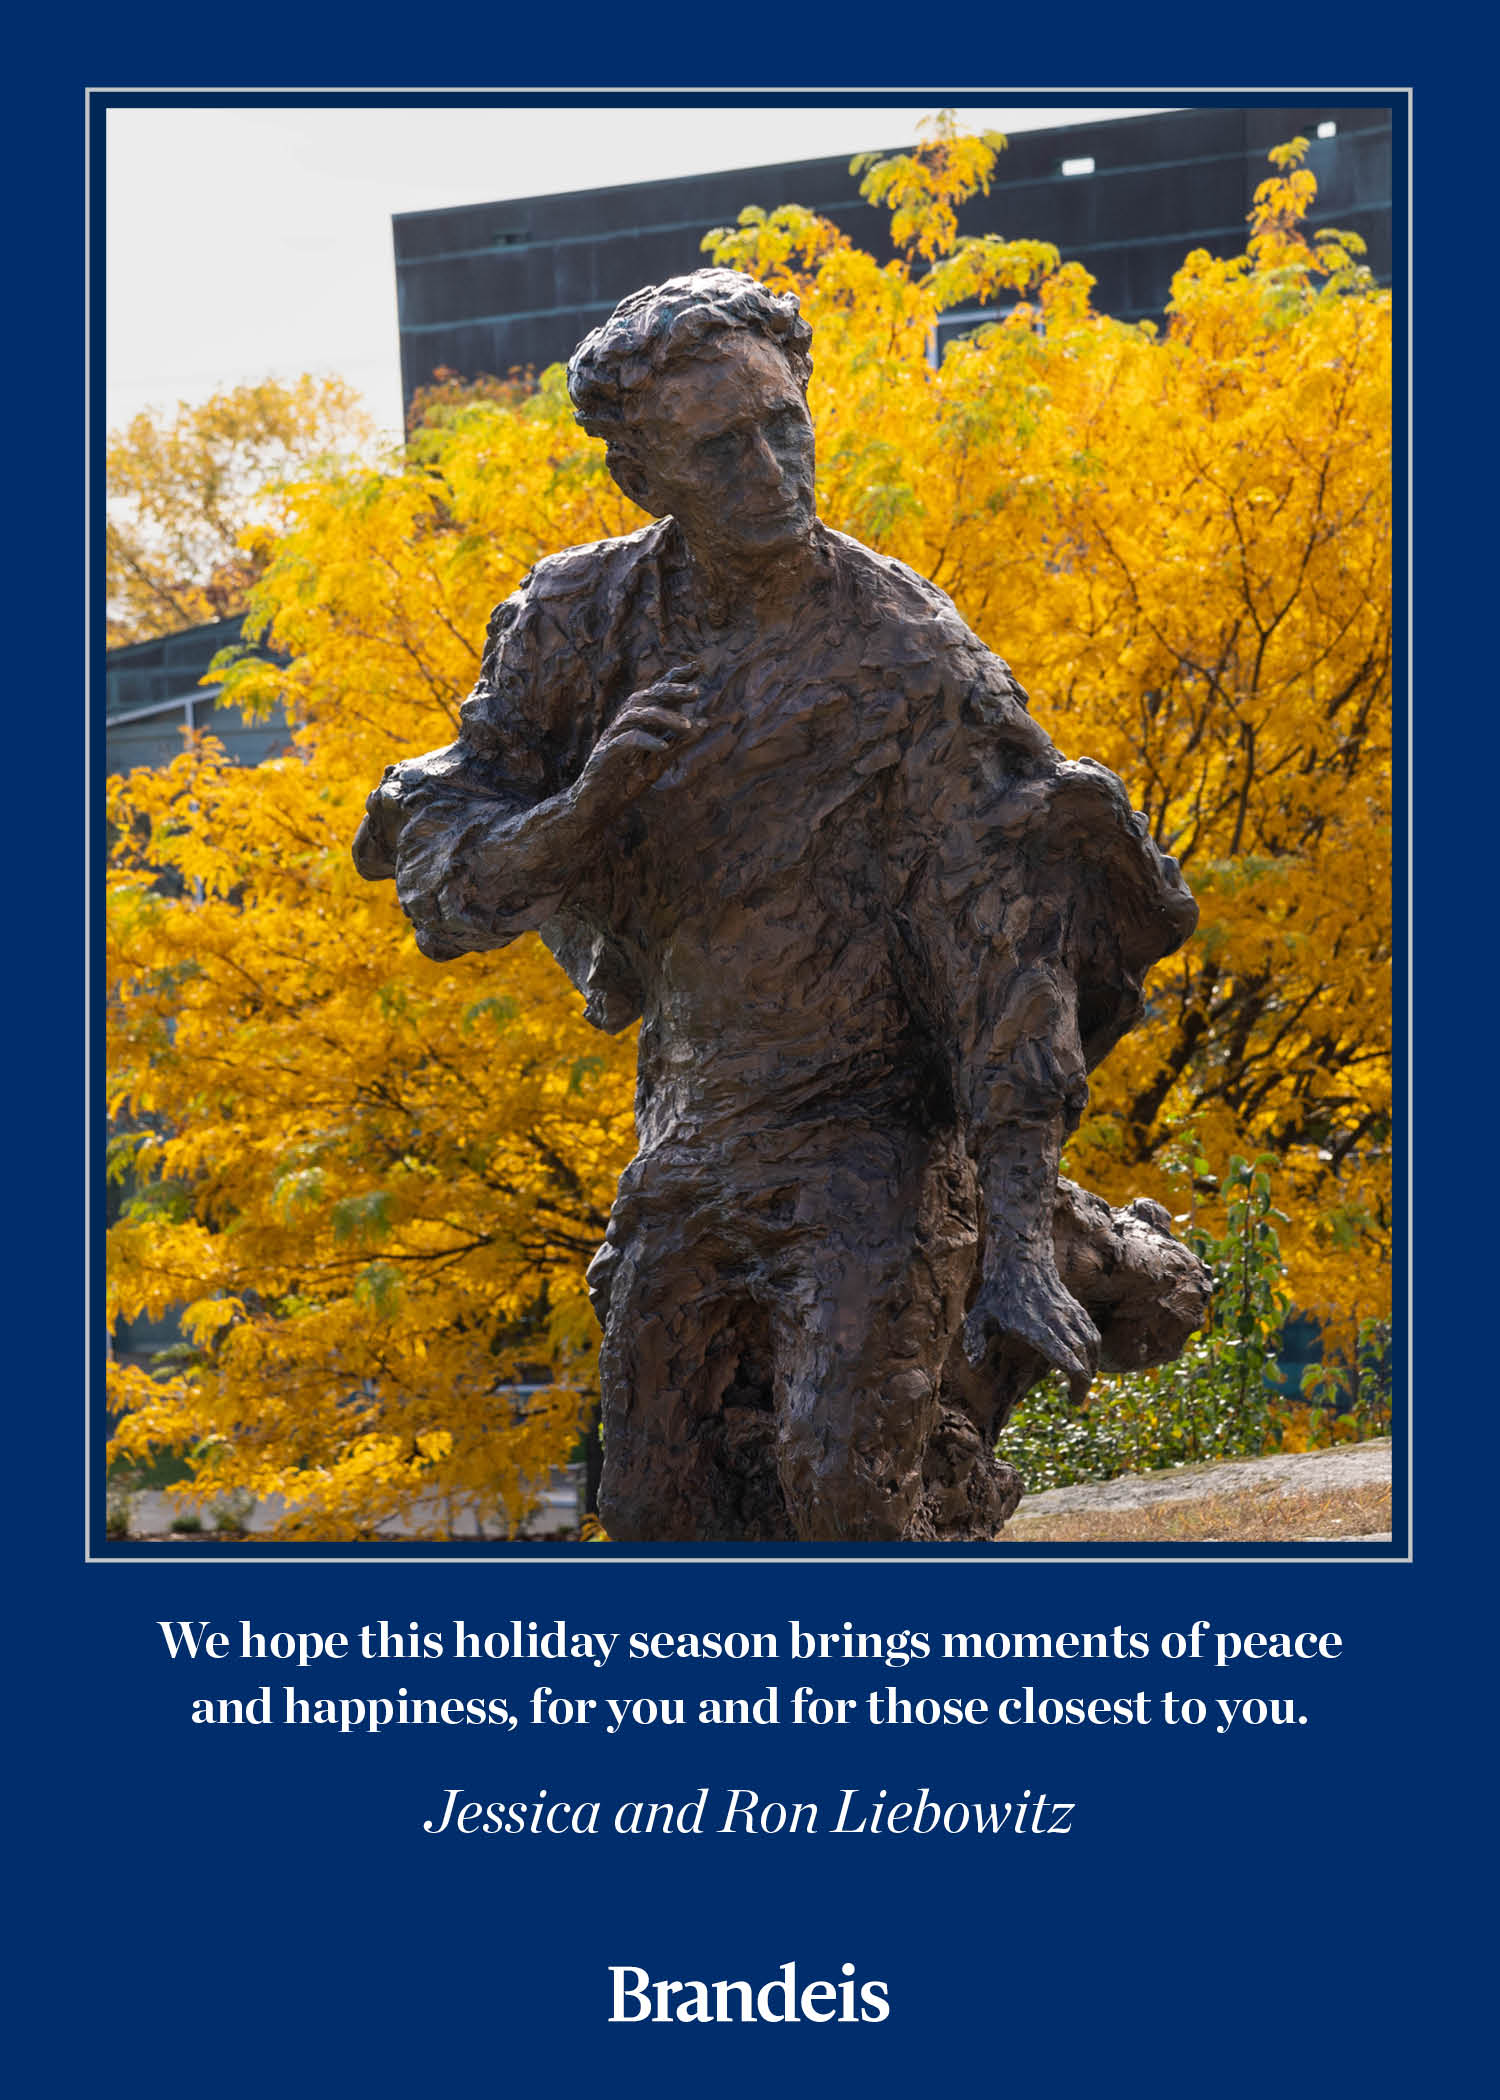 Statue of Louis Brandeis with yellow leaves in the background. Text reads: We hope this holiday season brings moments of peace and happiness for you, and for those closest to you. Jessica and Ron Liebowitz. Brandeis